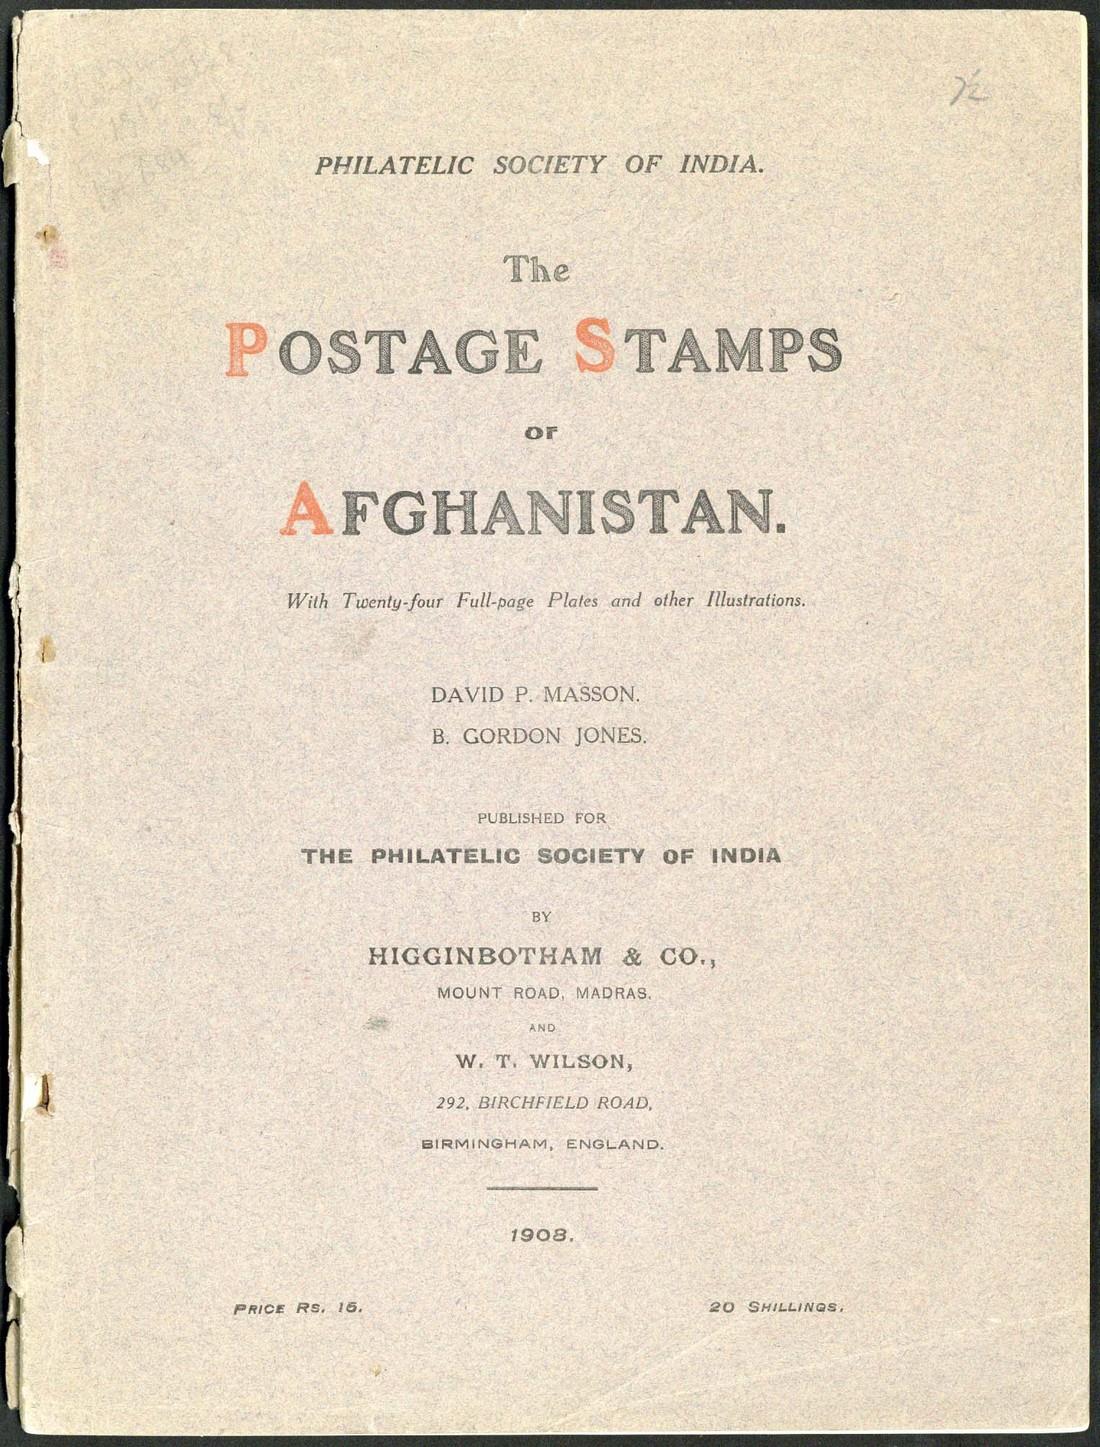 AfghanistanLiteratureSelection of eighteen items contained in a carton, including "The Postage